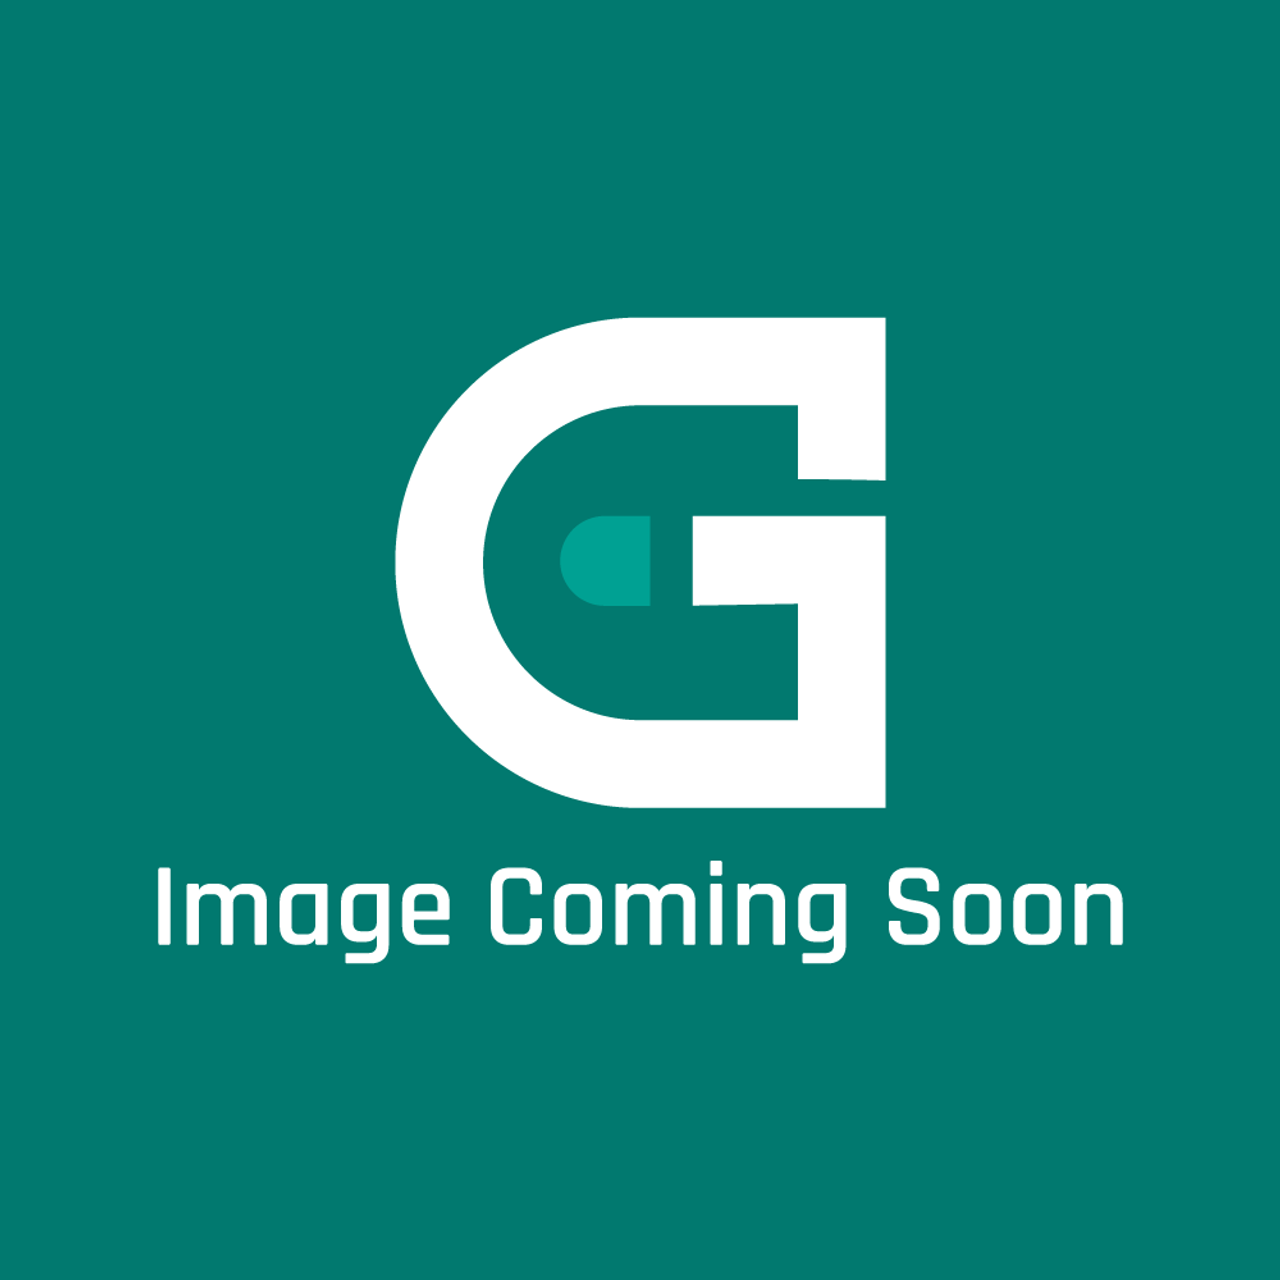 AGA Marvel S41015692-BLK - Grille Kit 15 Inch - Image Coming Soon!